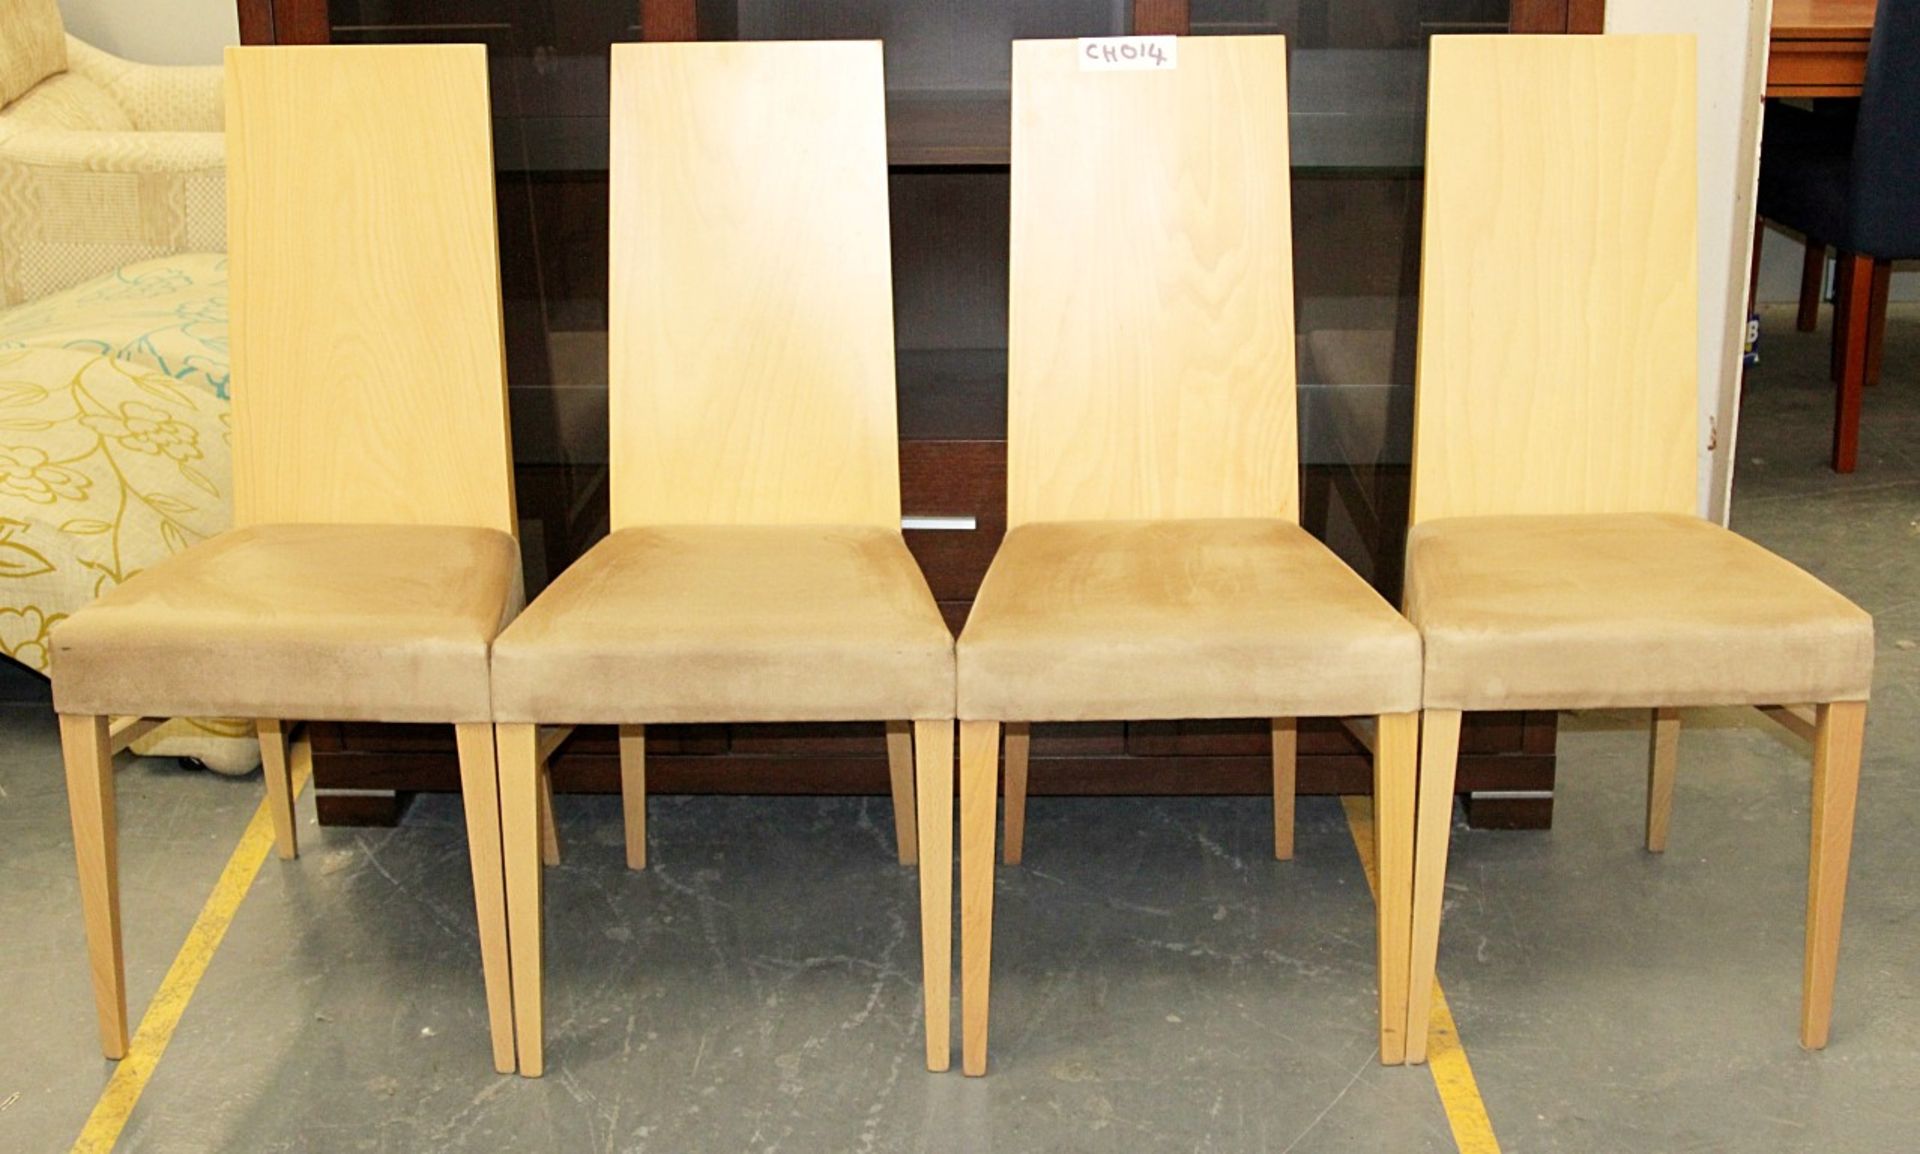 4 x Beech Chair With Suede Covered Seats – Ref CH014 - Ex Display Stock In Very Good Condition –